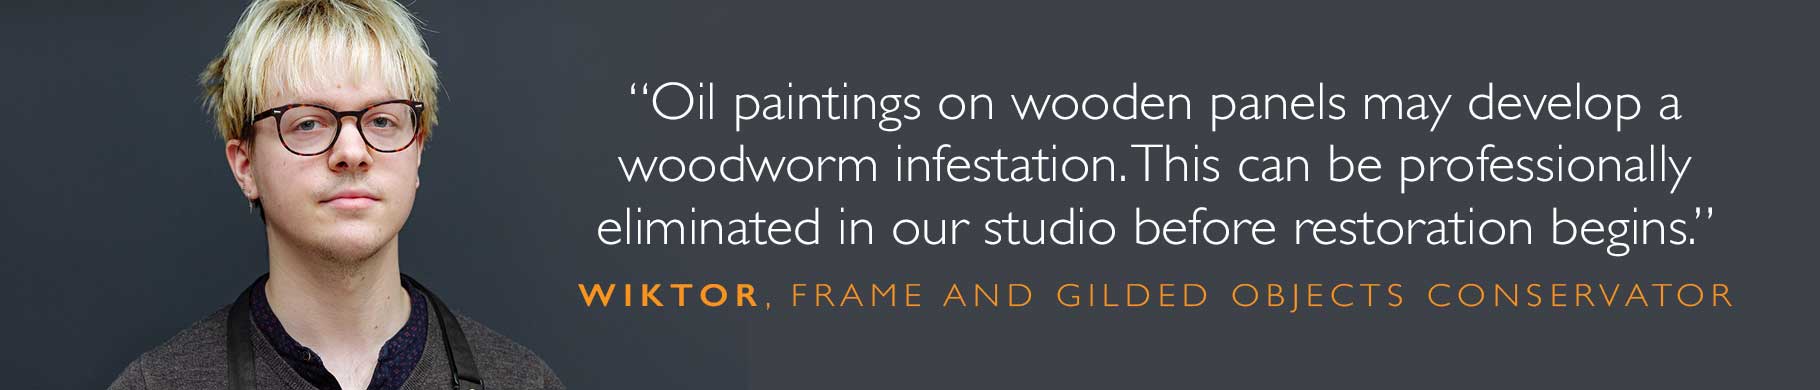 wiktor oil paintings on panel quote